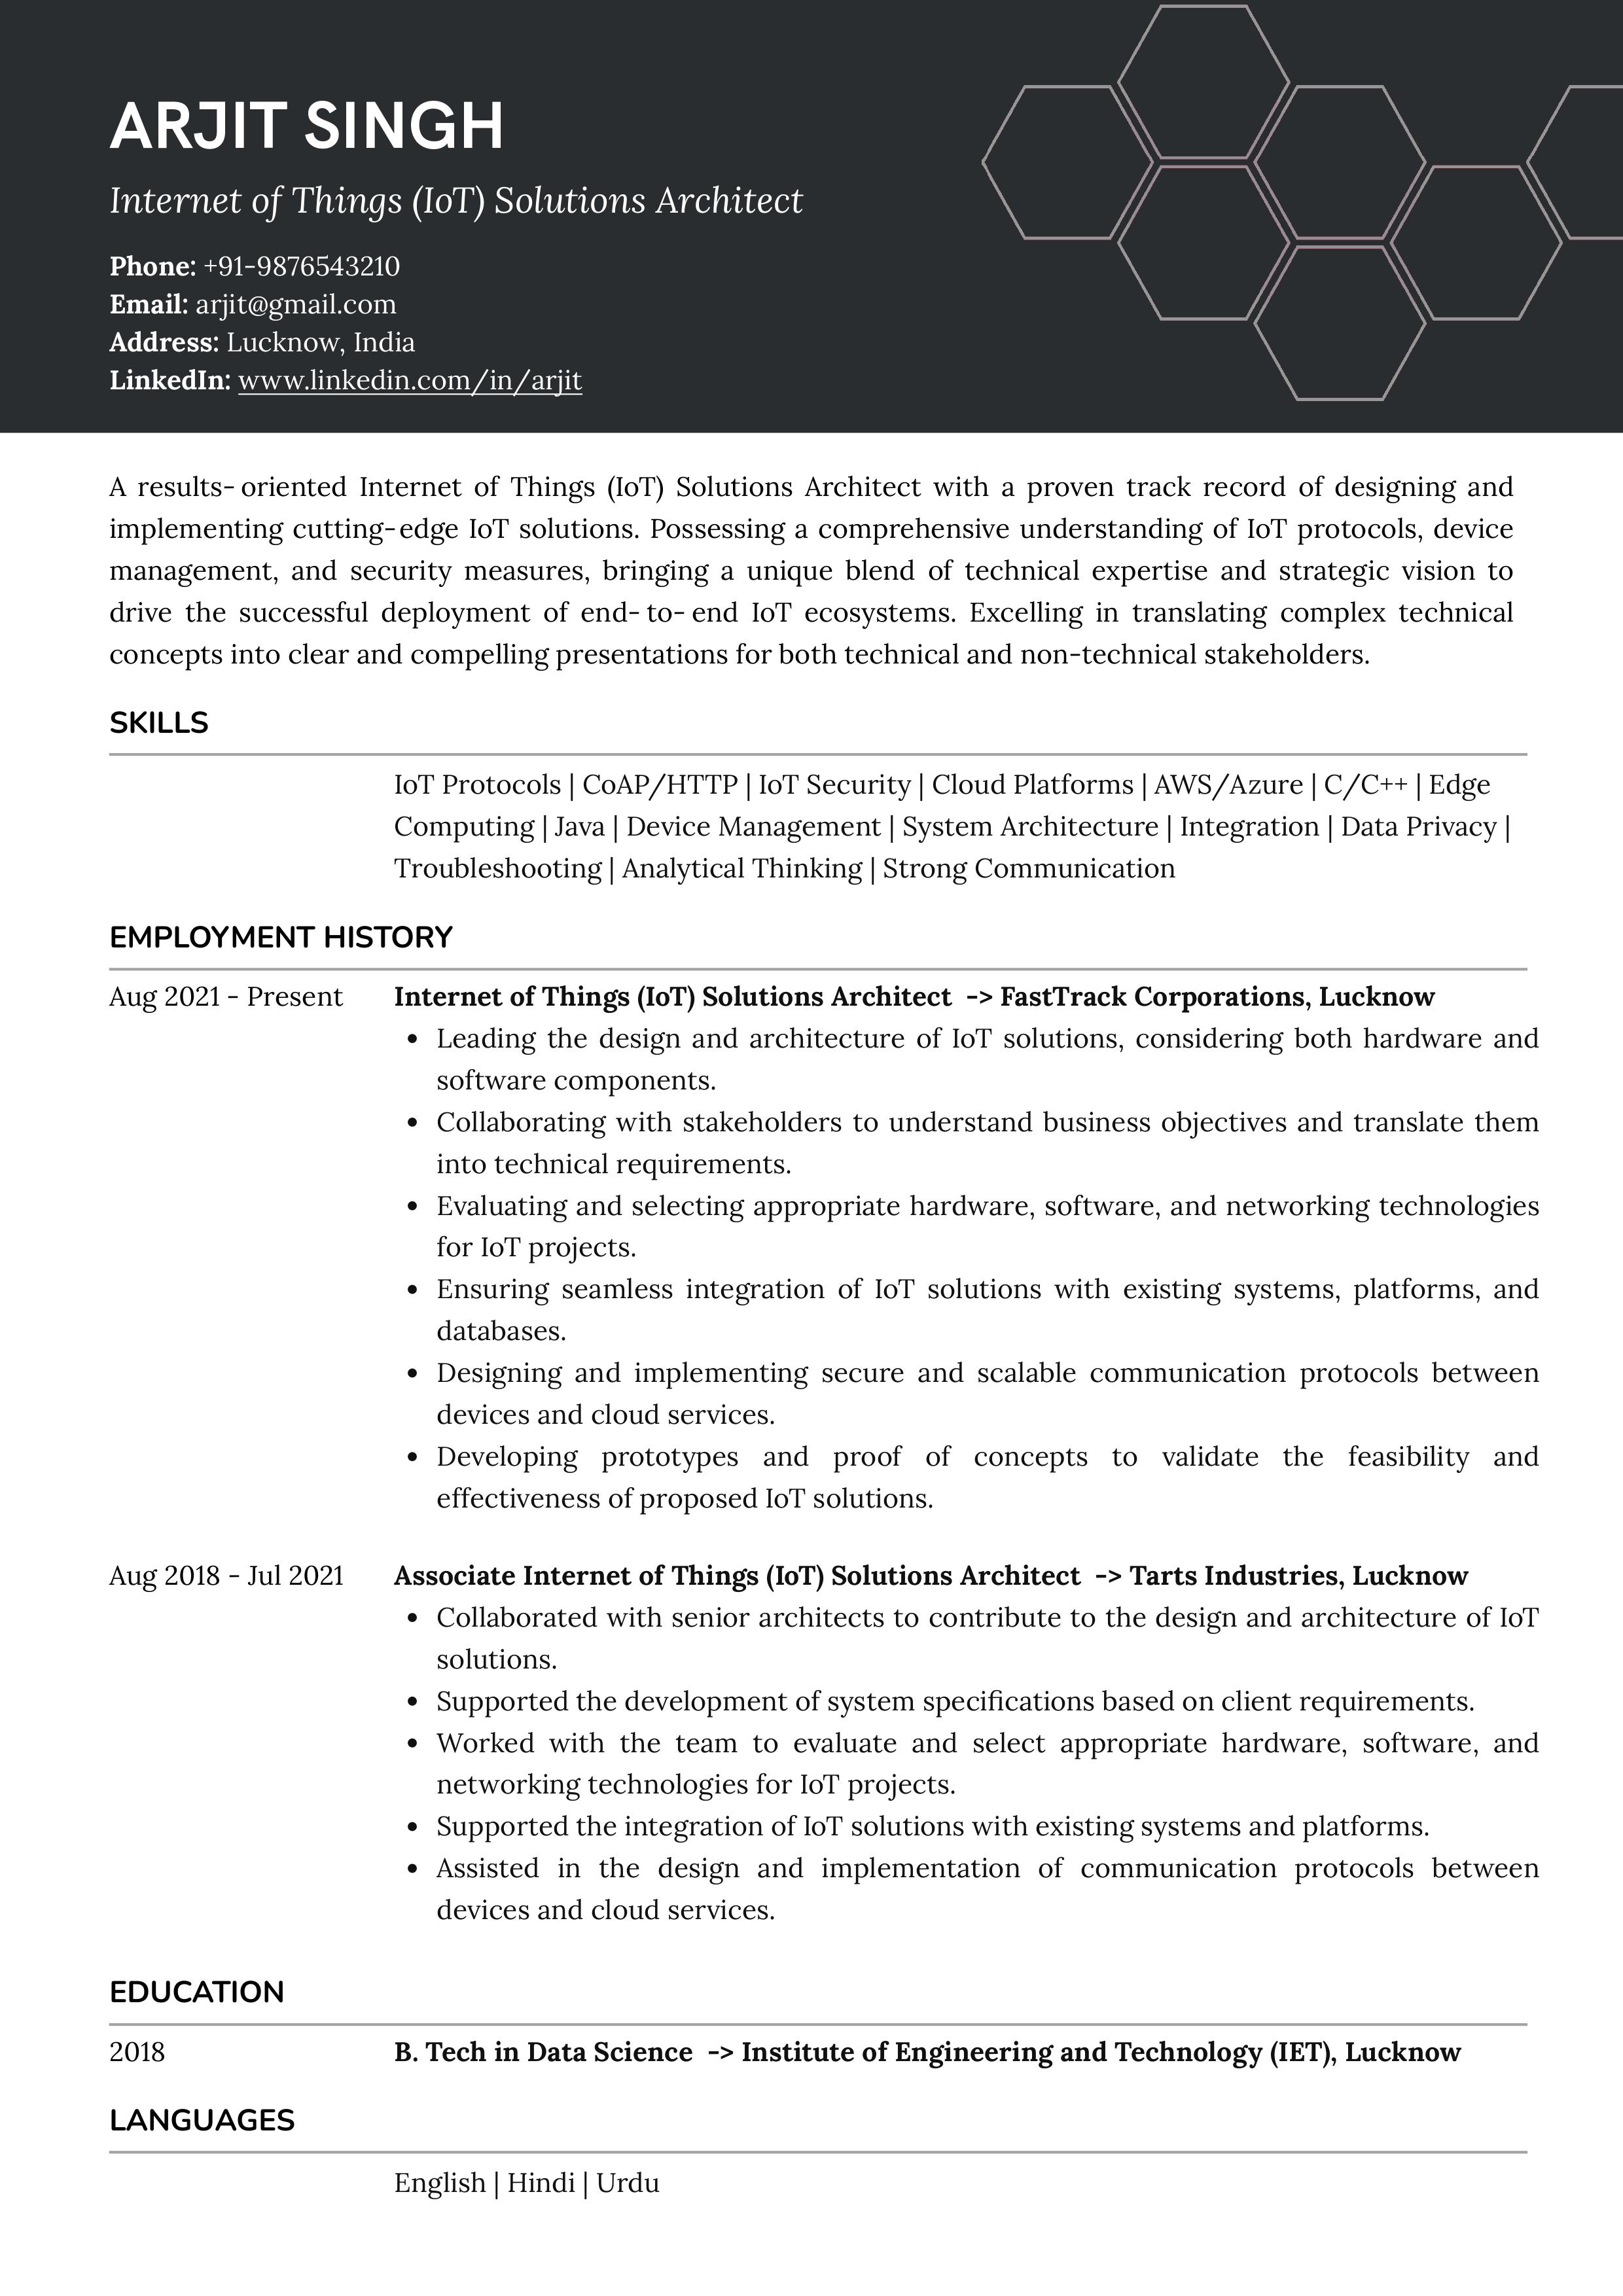 Sample Resume of  Internet Of Things (IoT) Solutions Architect | Free Resume Templates & Samples on Resumod.co